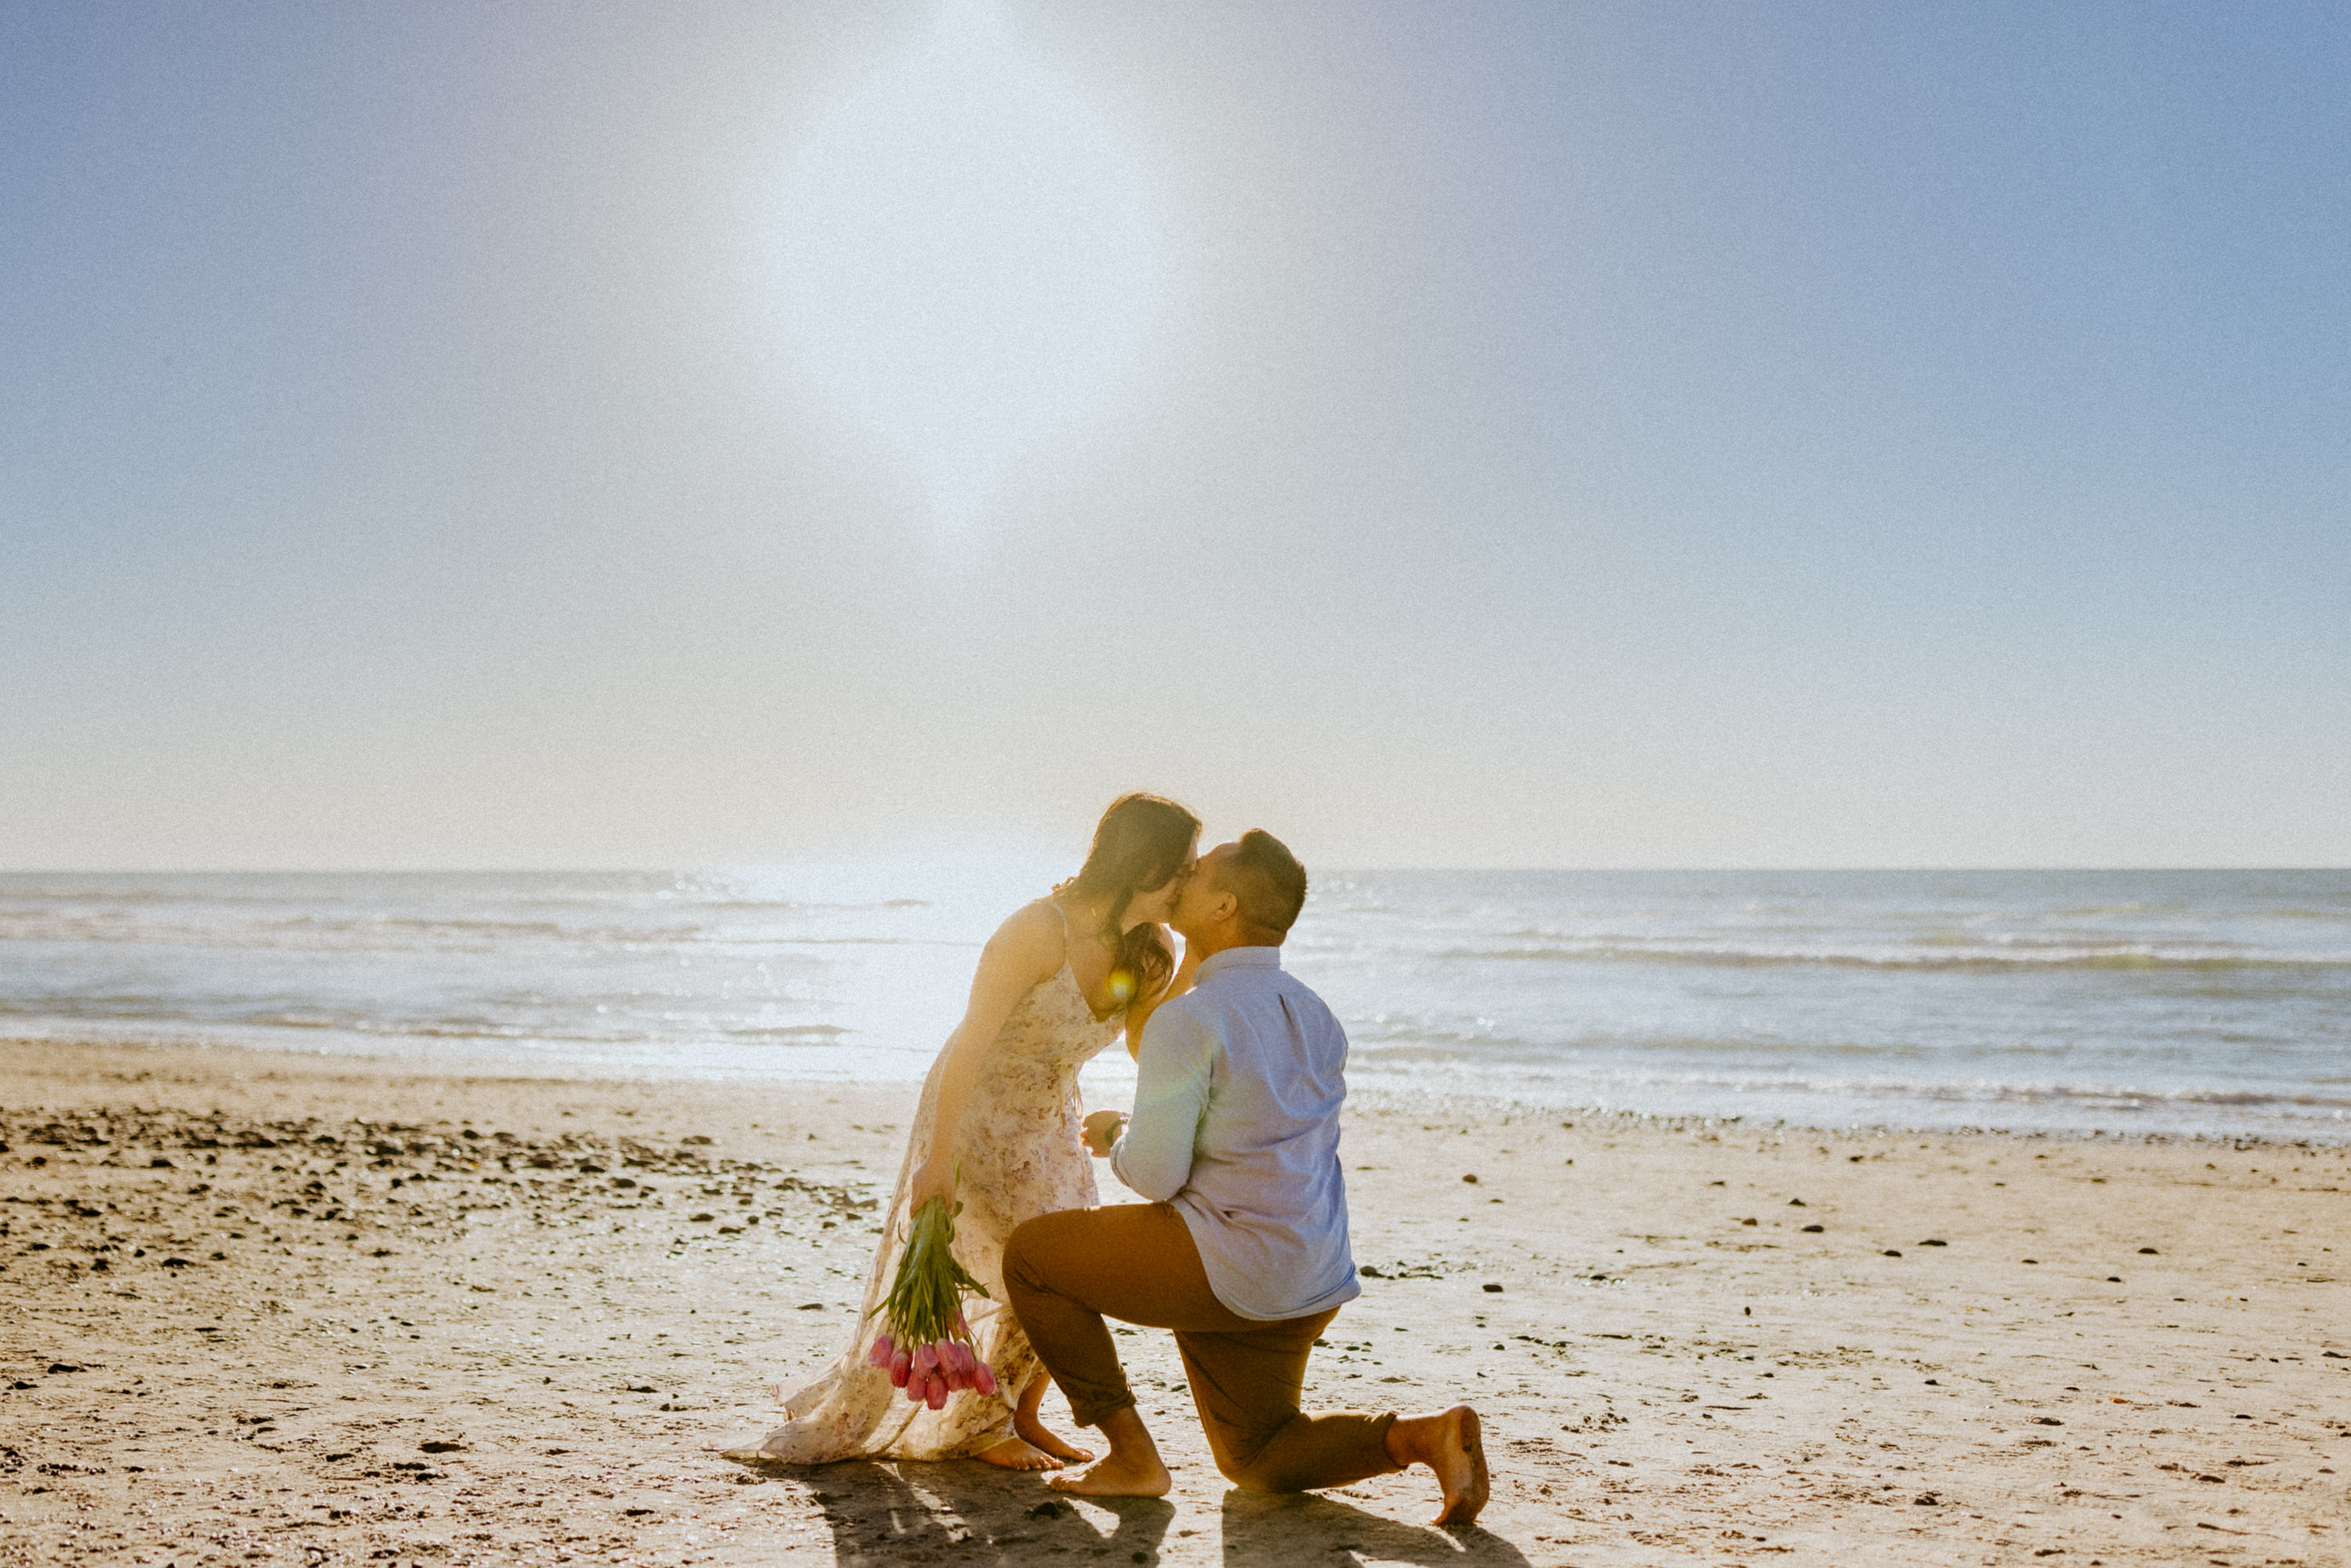 Romantic beach proposal with ocean waves crashing in the background.